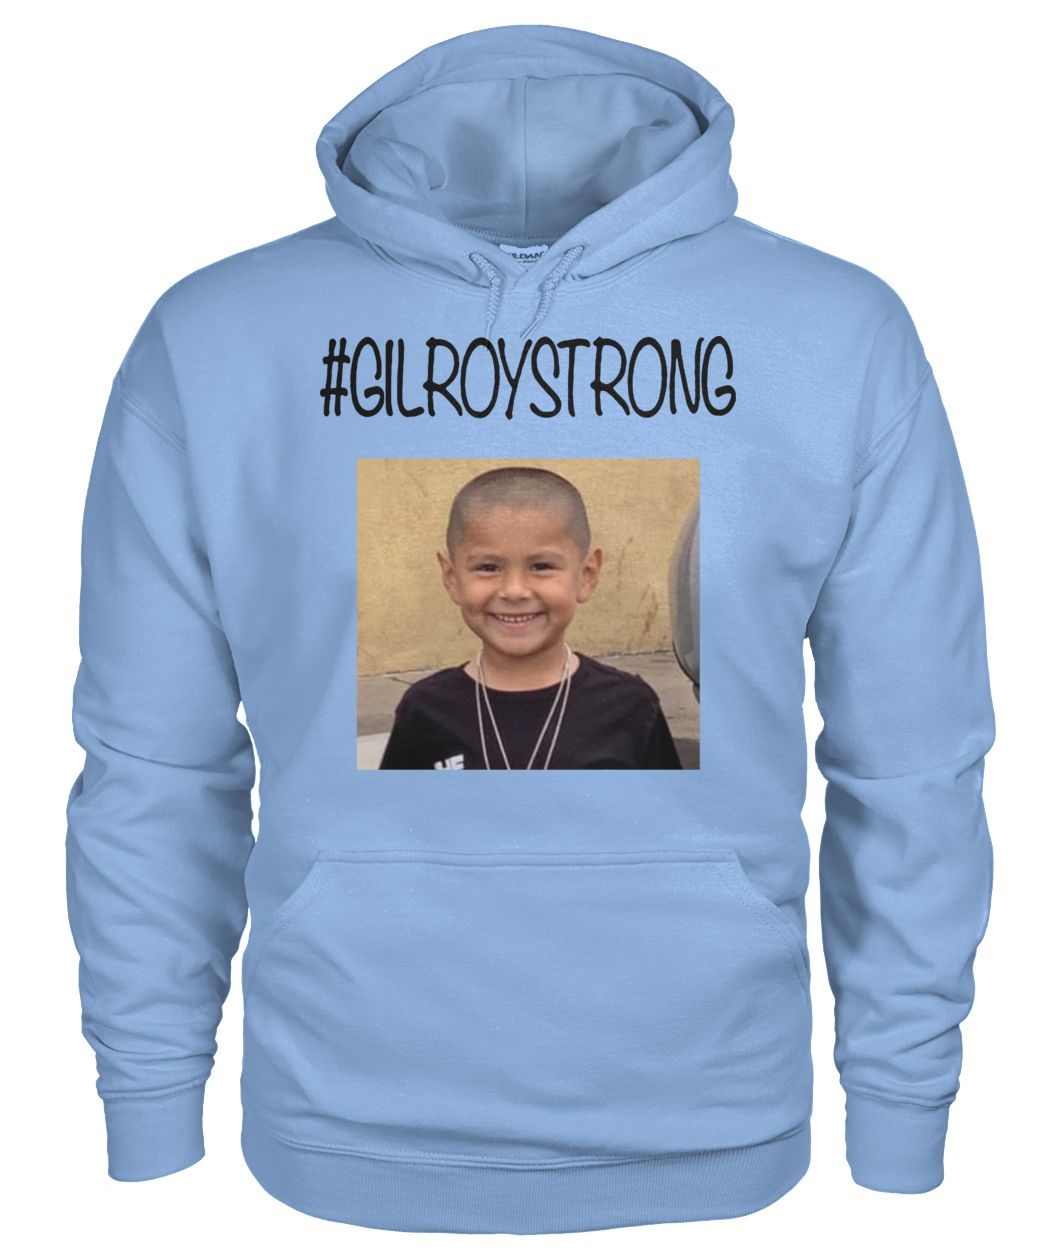 #gilroystrong rest in peace gildan hoodie